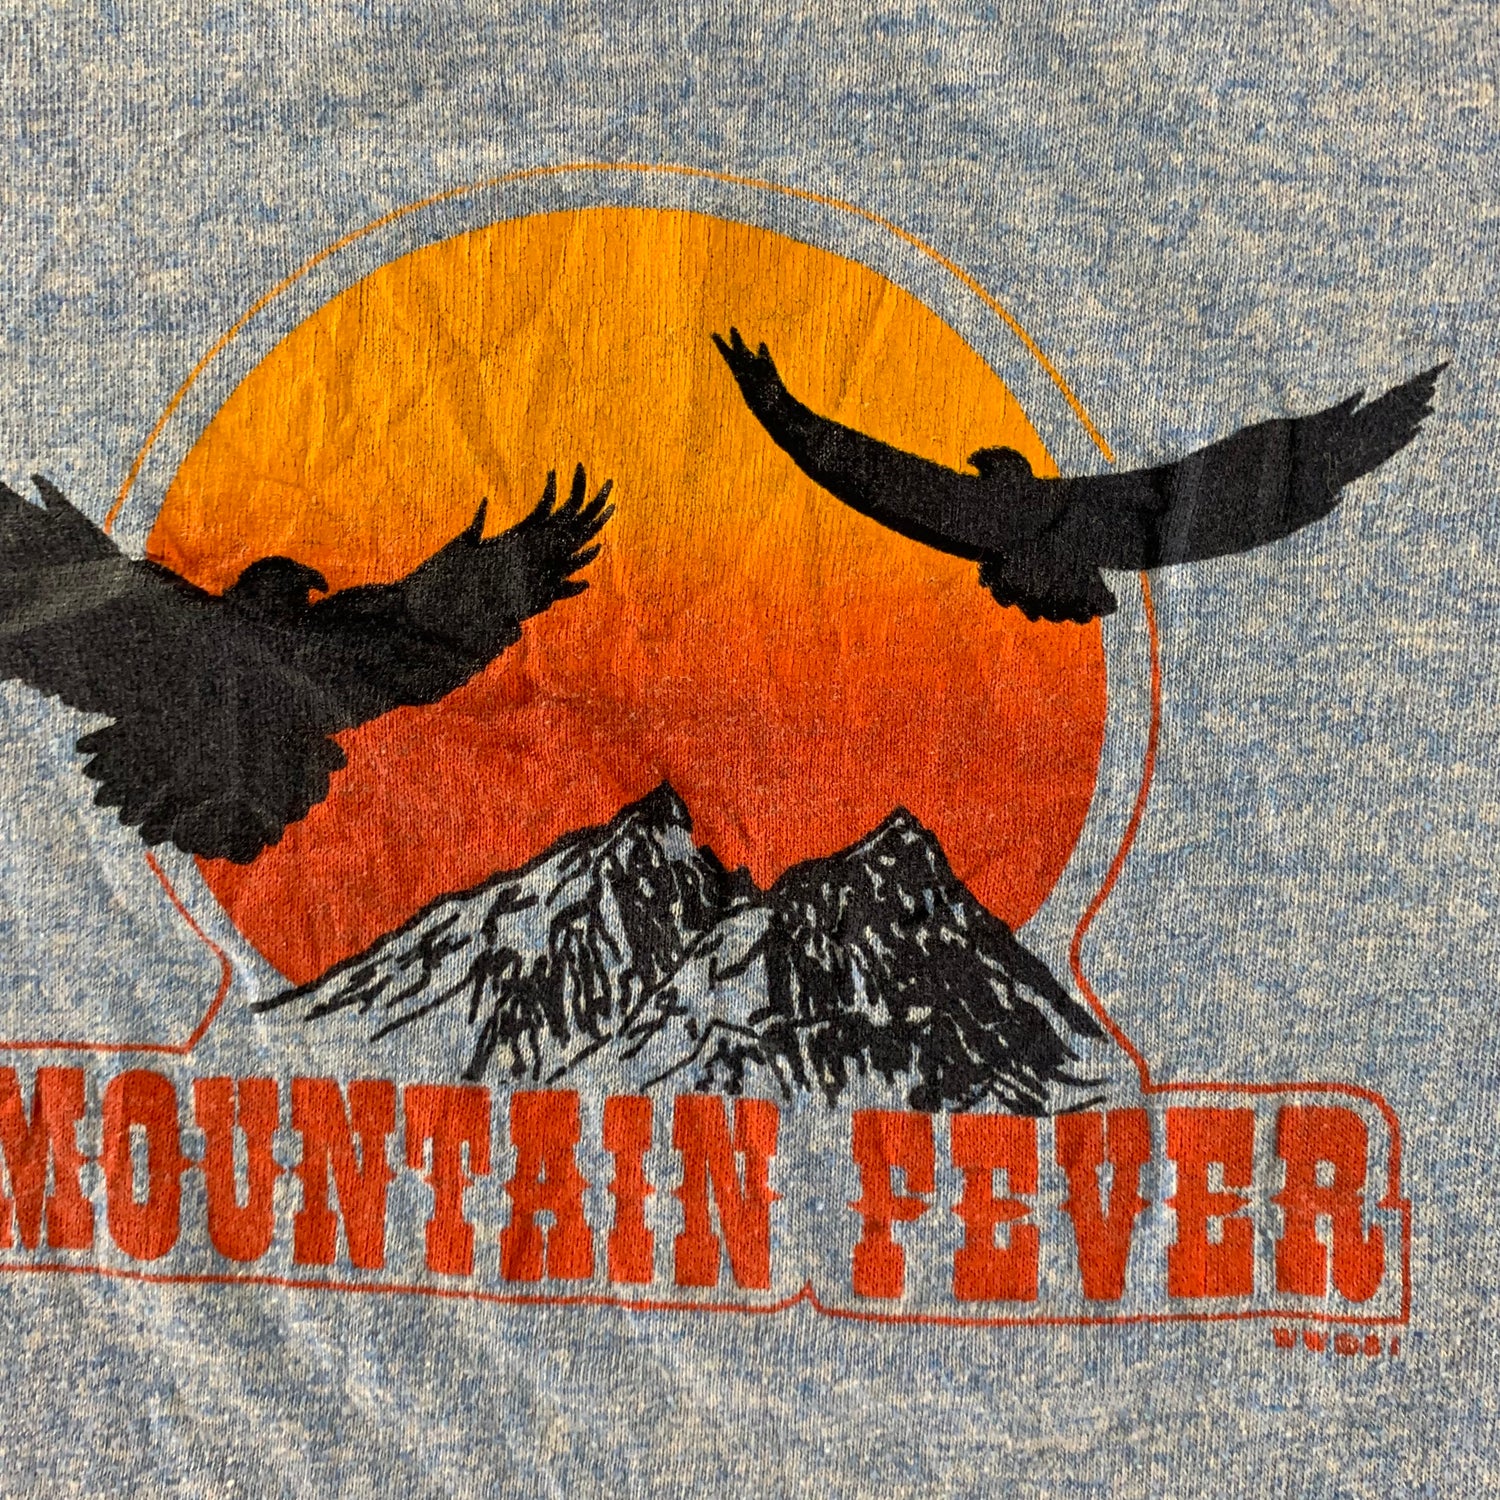 Vintage 1981 Mountain Fever T-shirt size Small